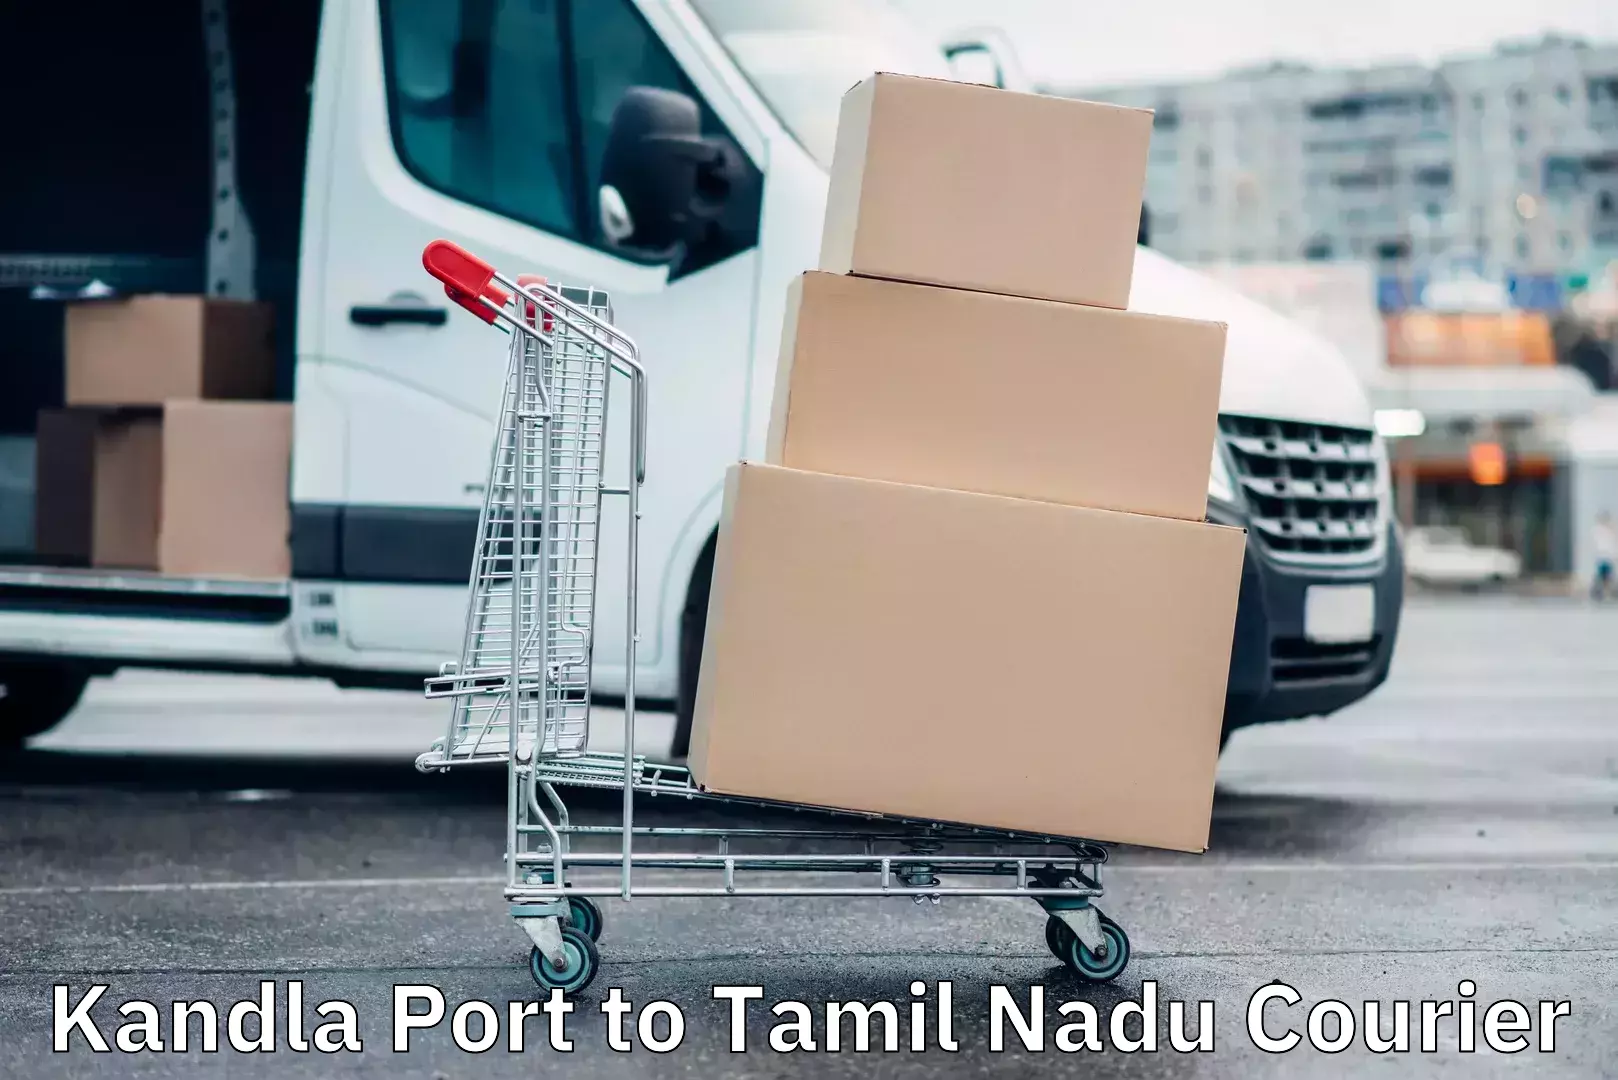 On-call courier service Kandla Port to Ennore Port Chennai